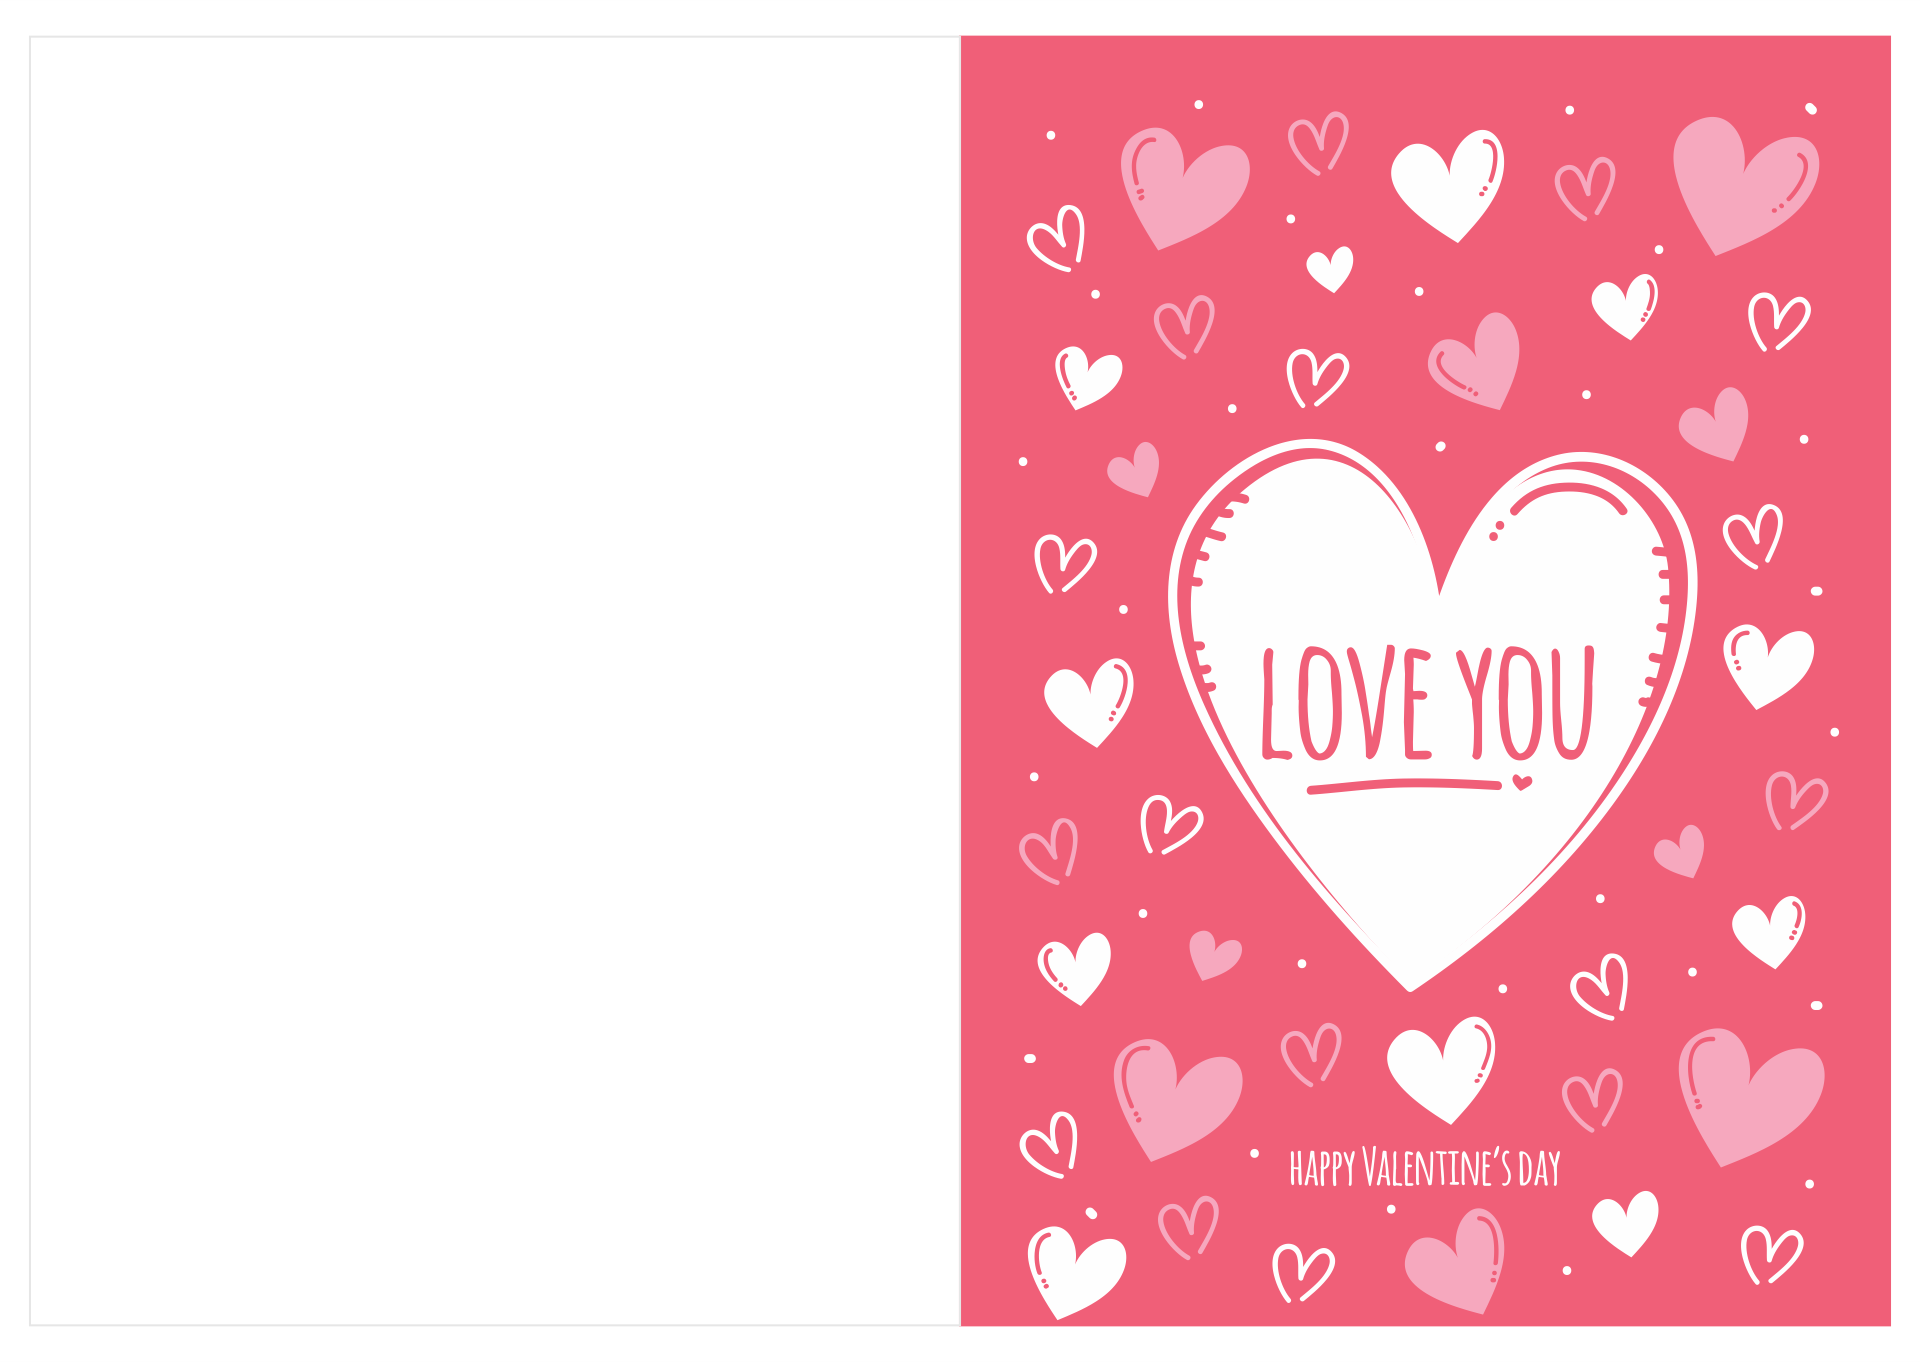 love-you-in-so-many-ways-valentine-s-day-card-for-wife-greeting-cards